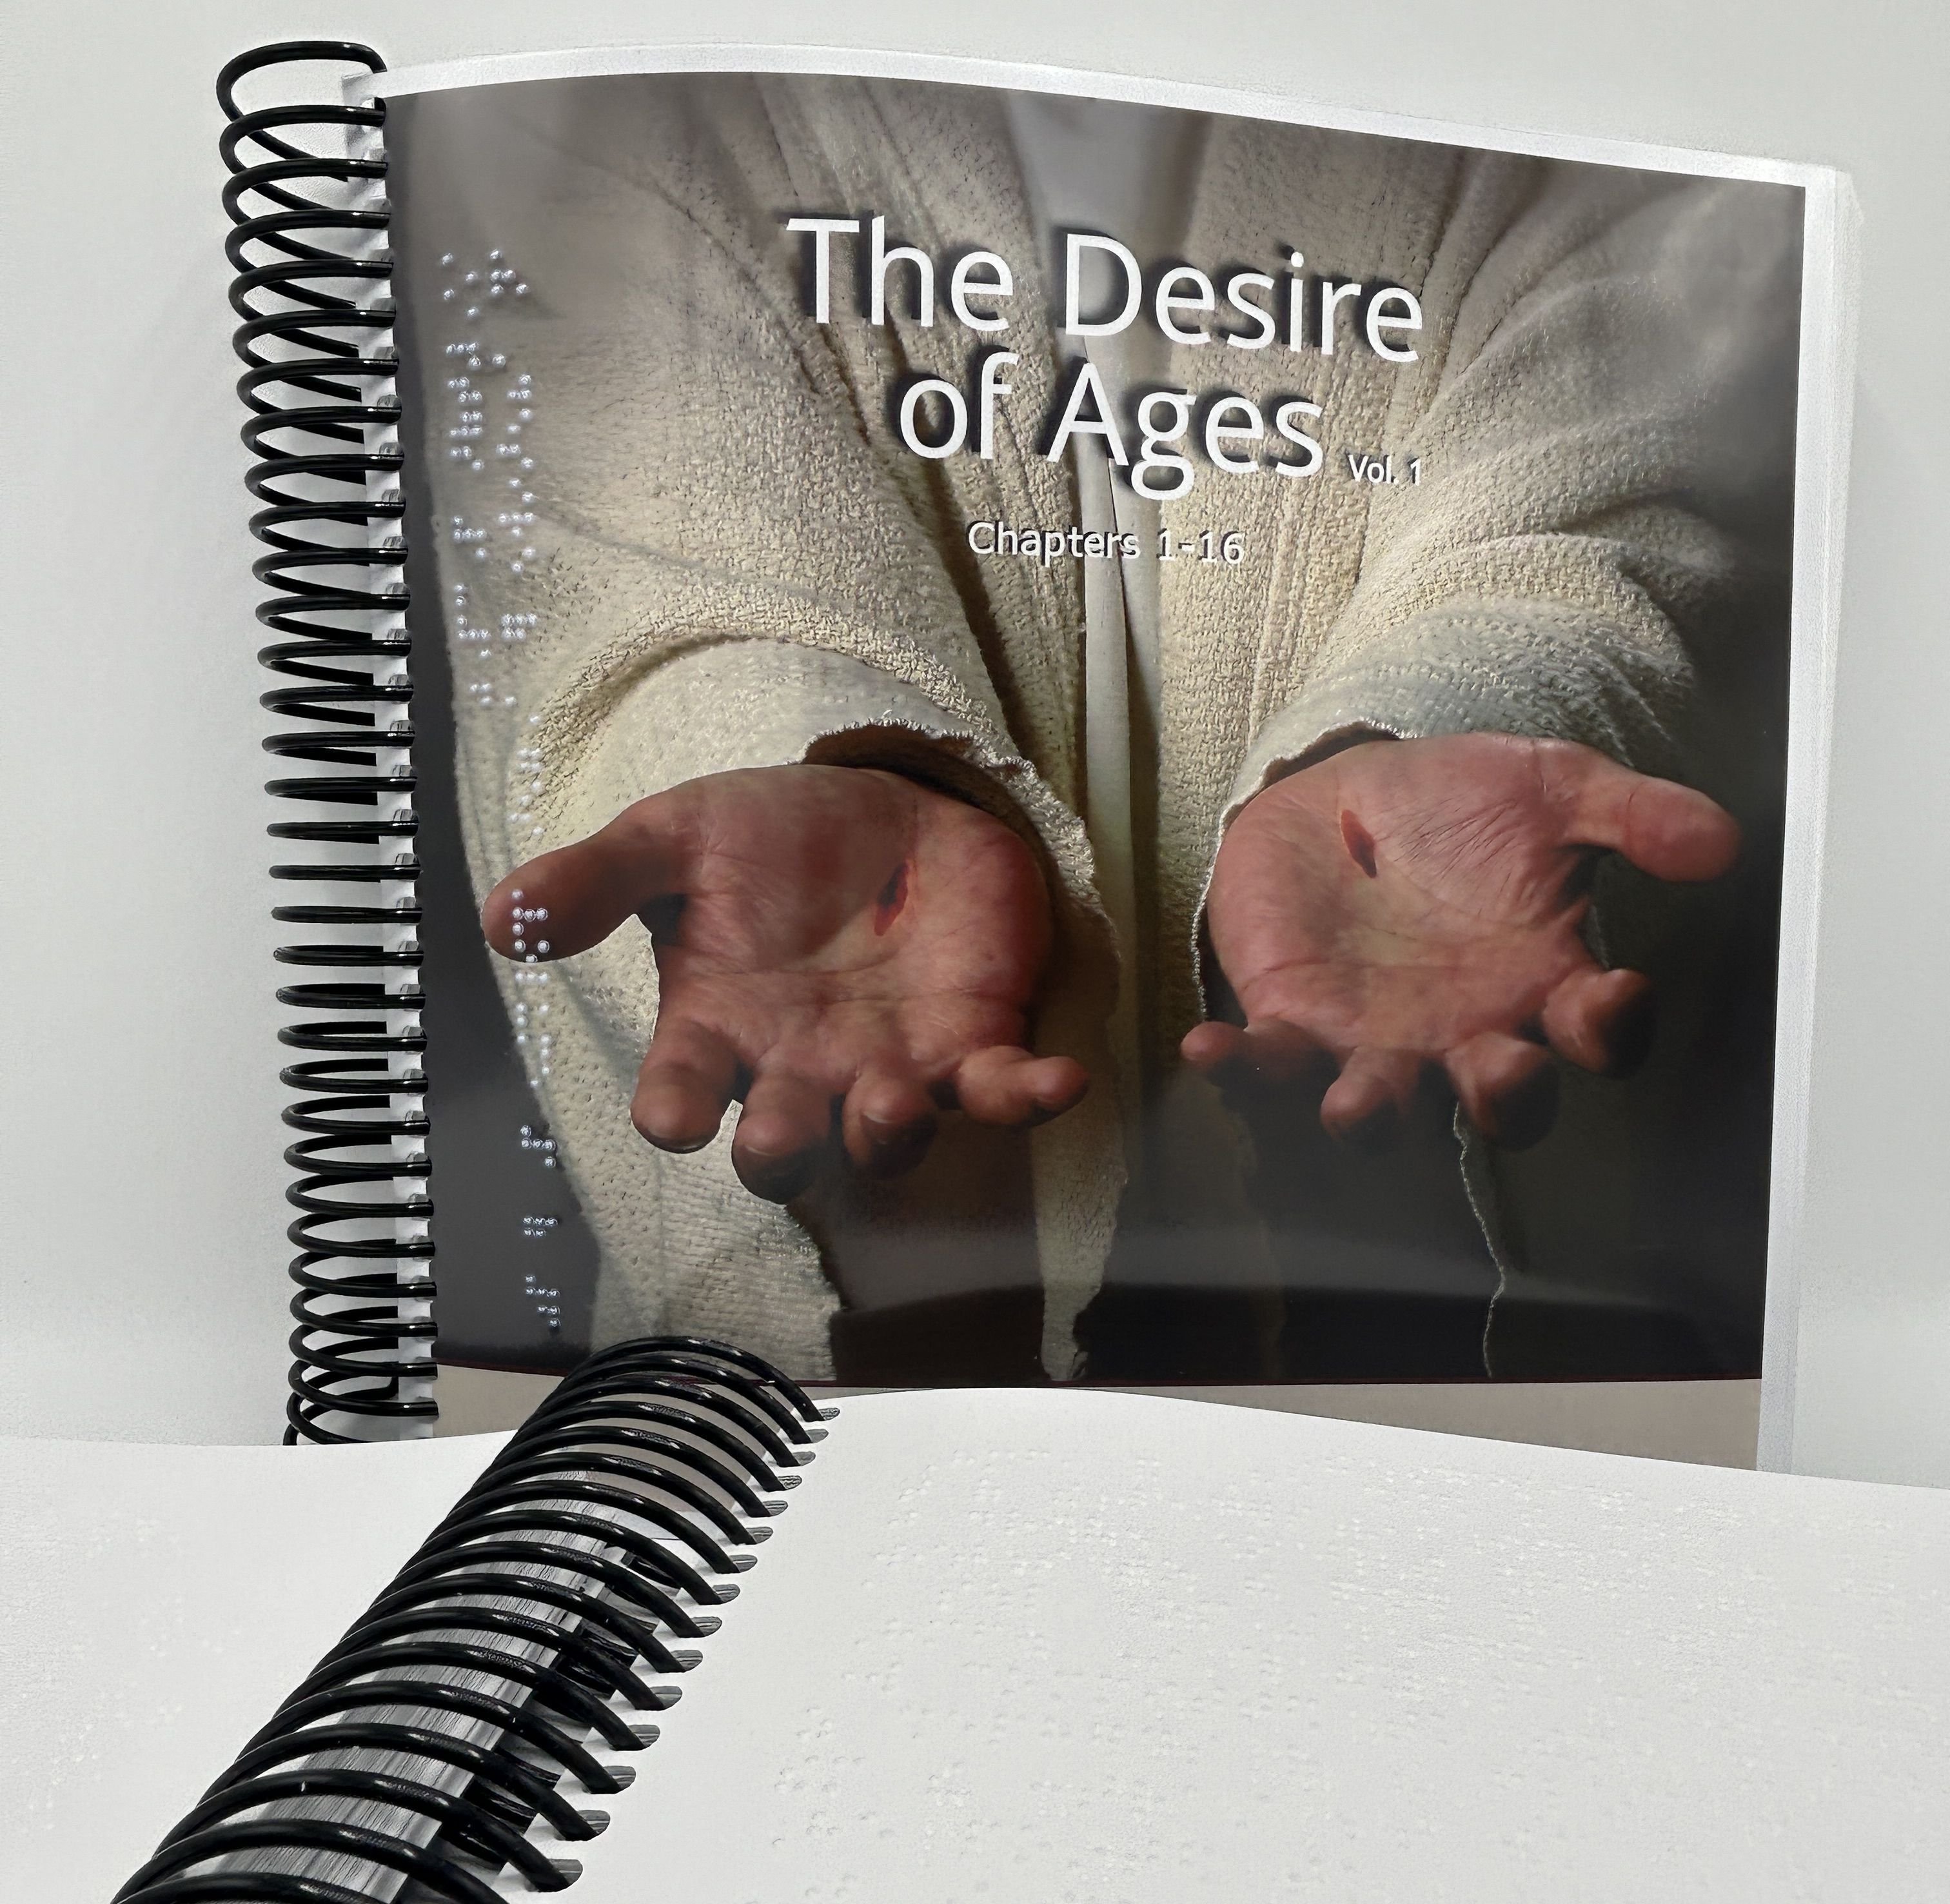 Christian Record Services Offers "The Desire of Ages" in Braille and Large Print